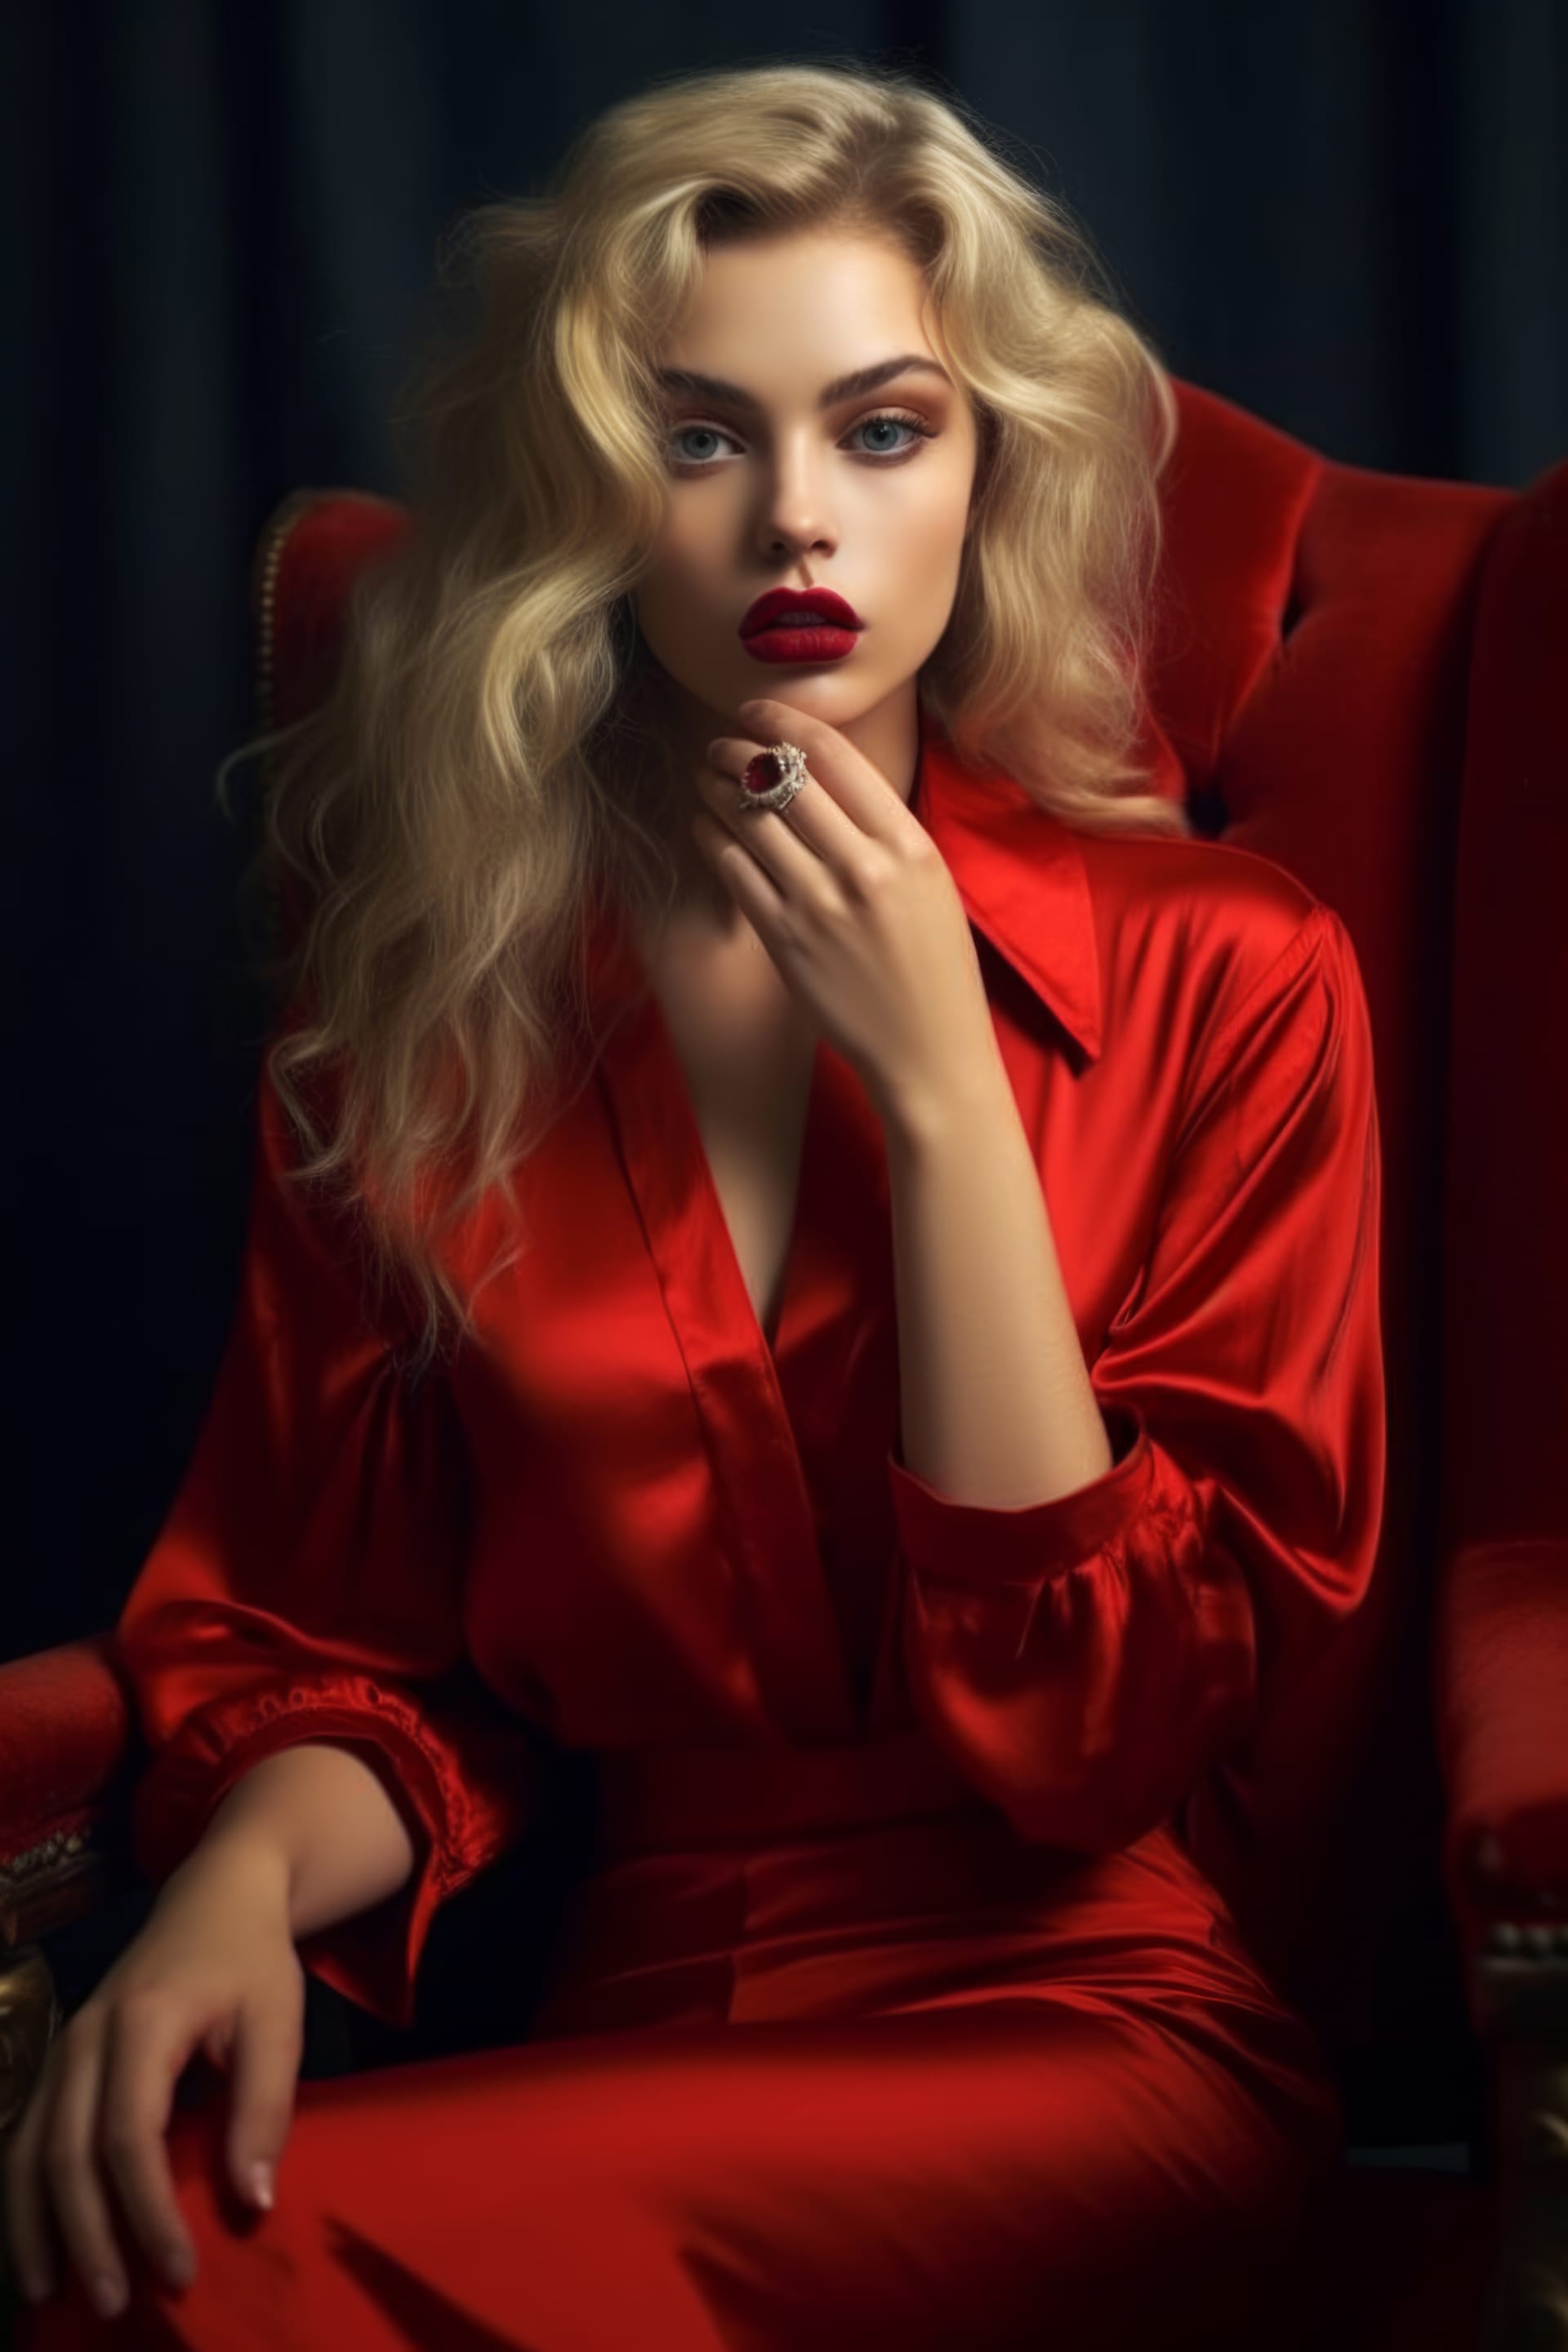 Woman red dress sits chair best instagram profile pictures